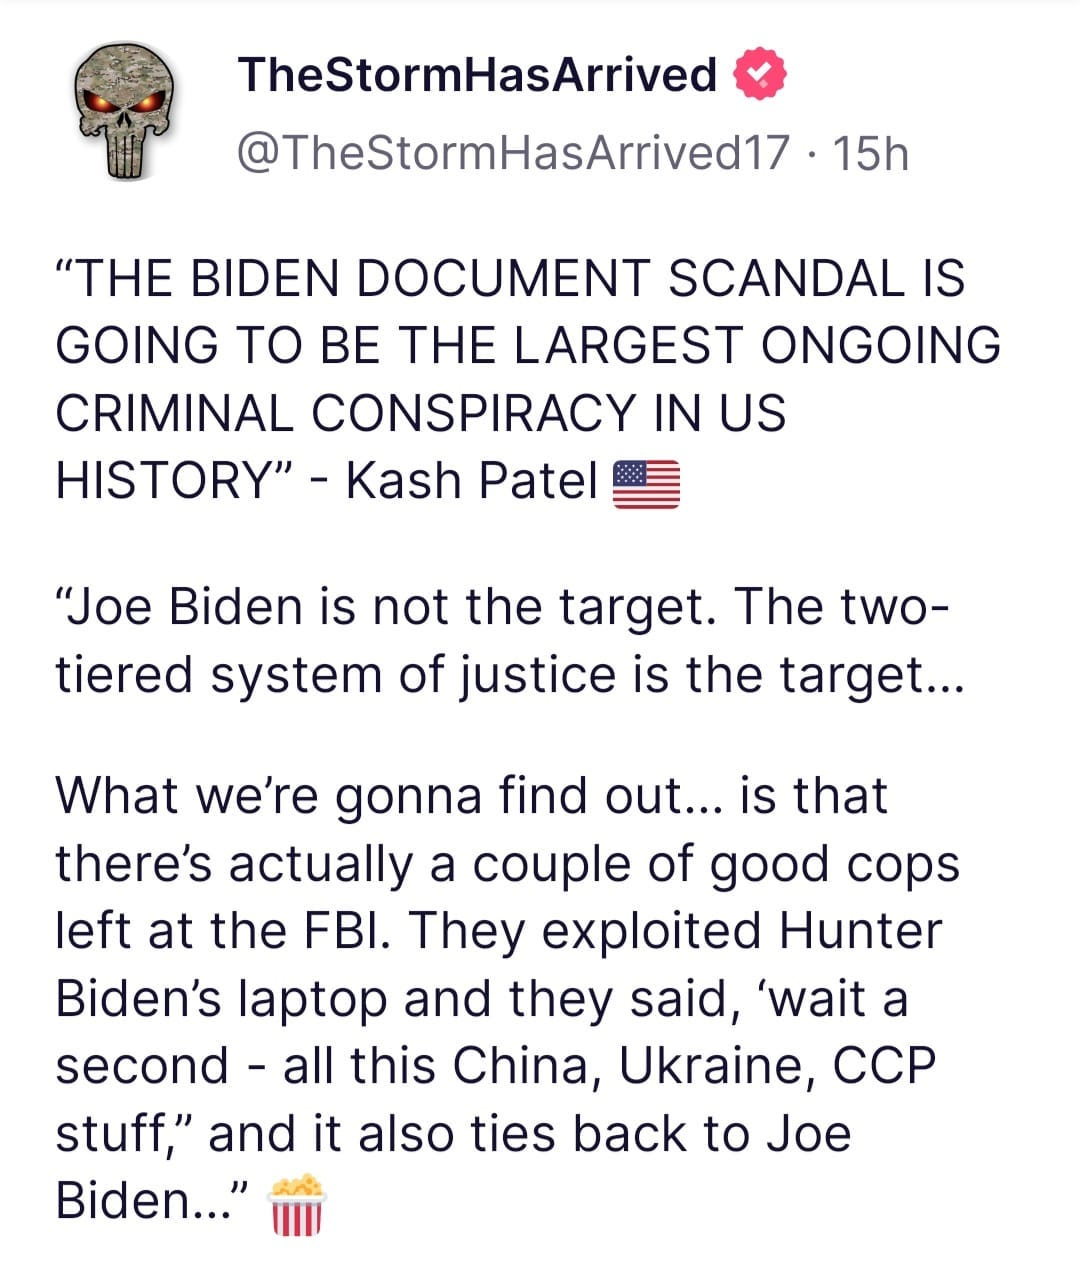 May be an image of text that says 'TheStormHasArrived @TheStormHasArrived17 15h "THE BIDEN DOCUMENT SCANDAL IS GOING TO BE THE LARGEST ONGOING CRIMINAL CONSPIRACY IN US HISTORY" Kash Patel "Joe Biden is not the target. The two- tiered system of justice is the target... What we're gonna find out... is that there's actually a couple of good cops left at the FBI. They exploited Hunter Biden's laptop and they said, 'wait a second -all this China, Ukraine, ccp stuff," and it also ties back to Joe Biden..."'